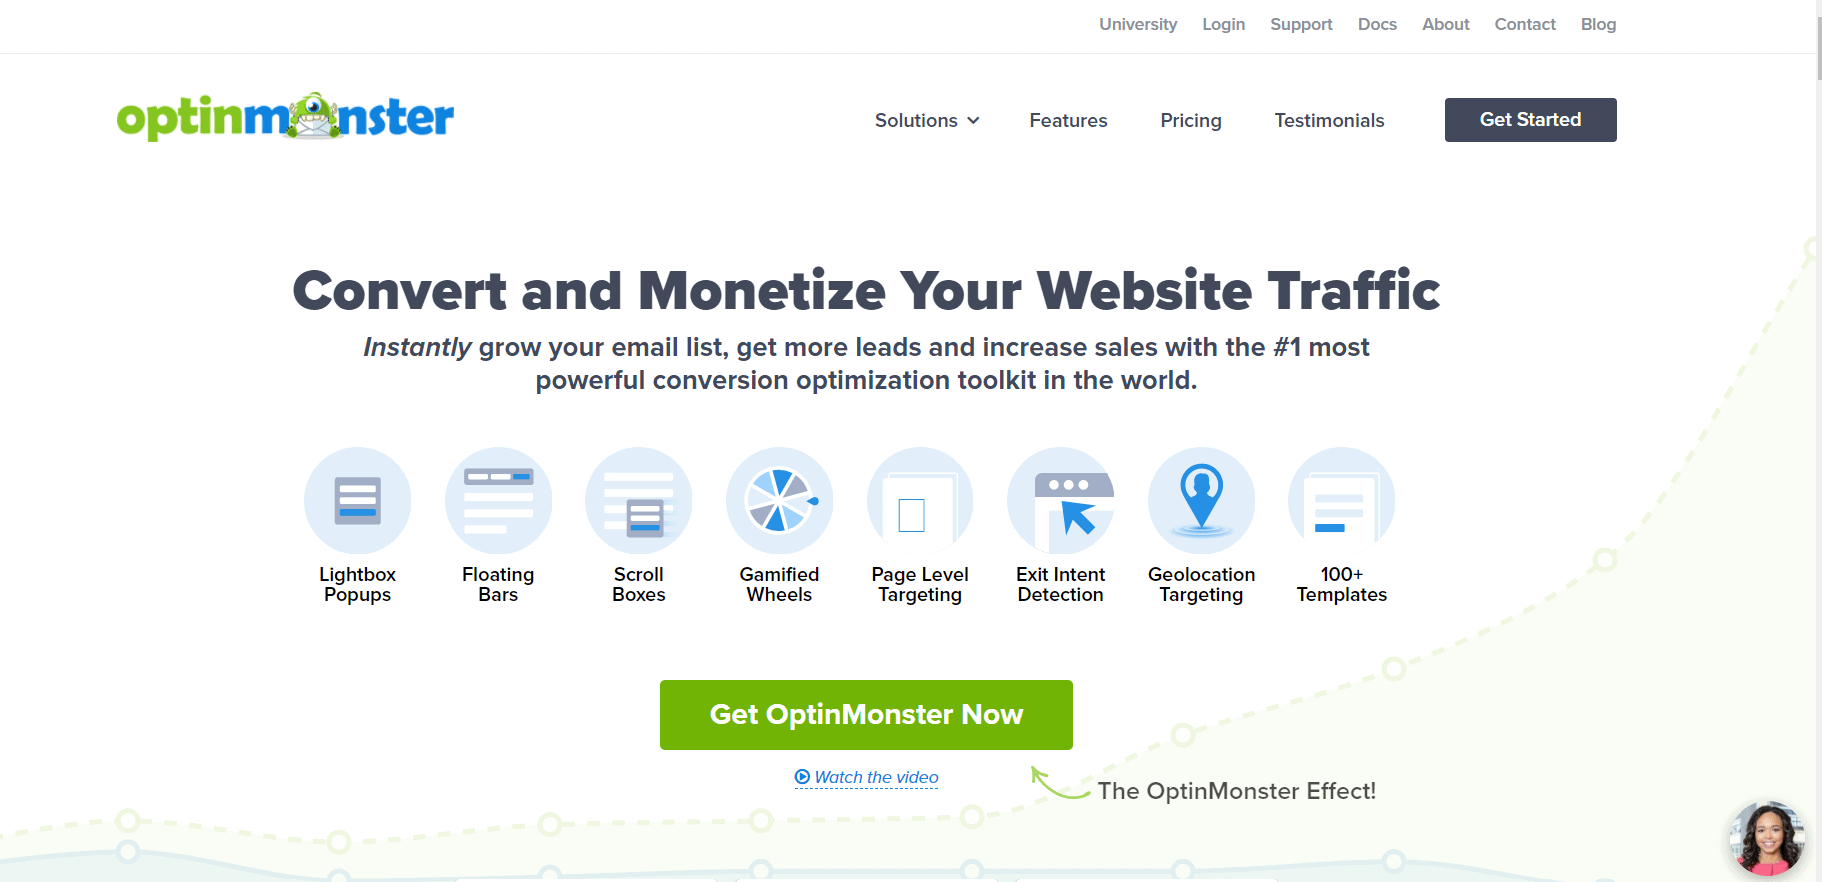 OptinMonster - overview